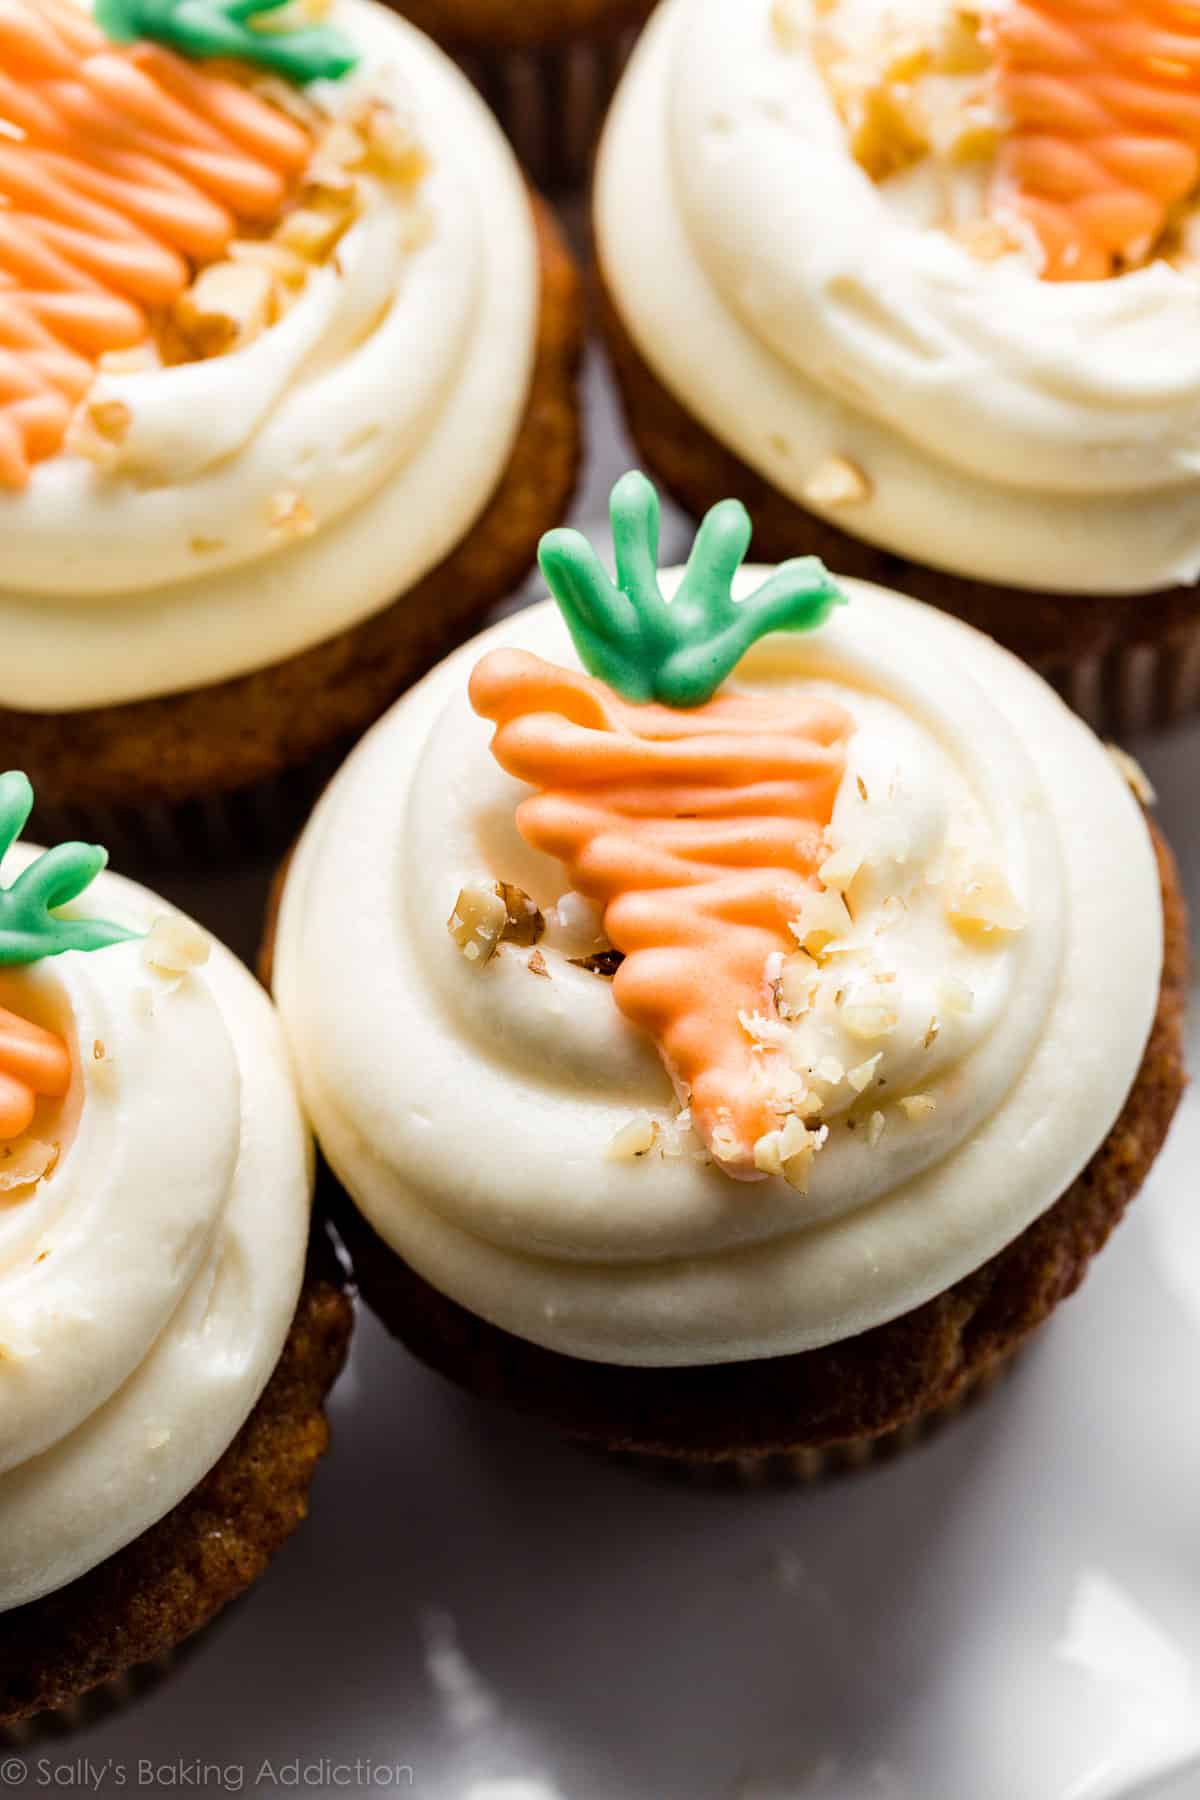 carrot cake cupcakes with white chocolate carrot garnish on top